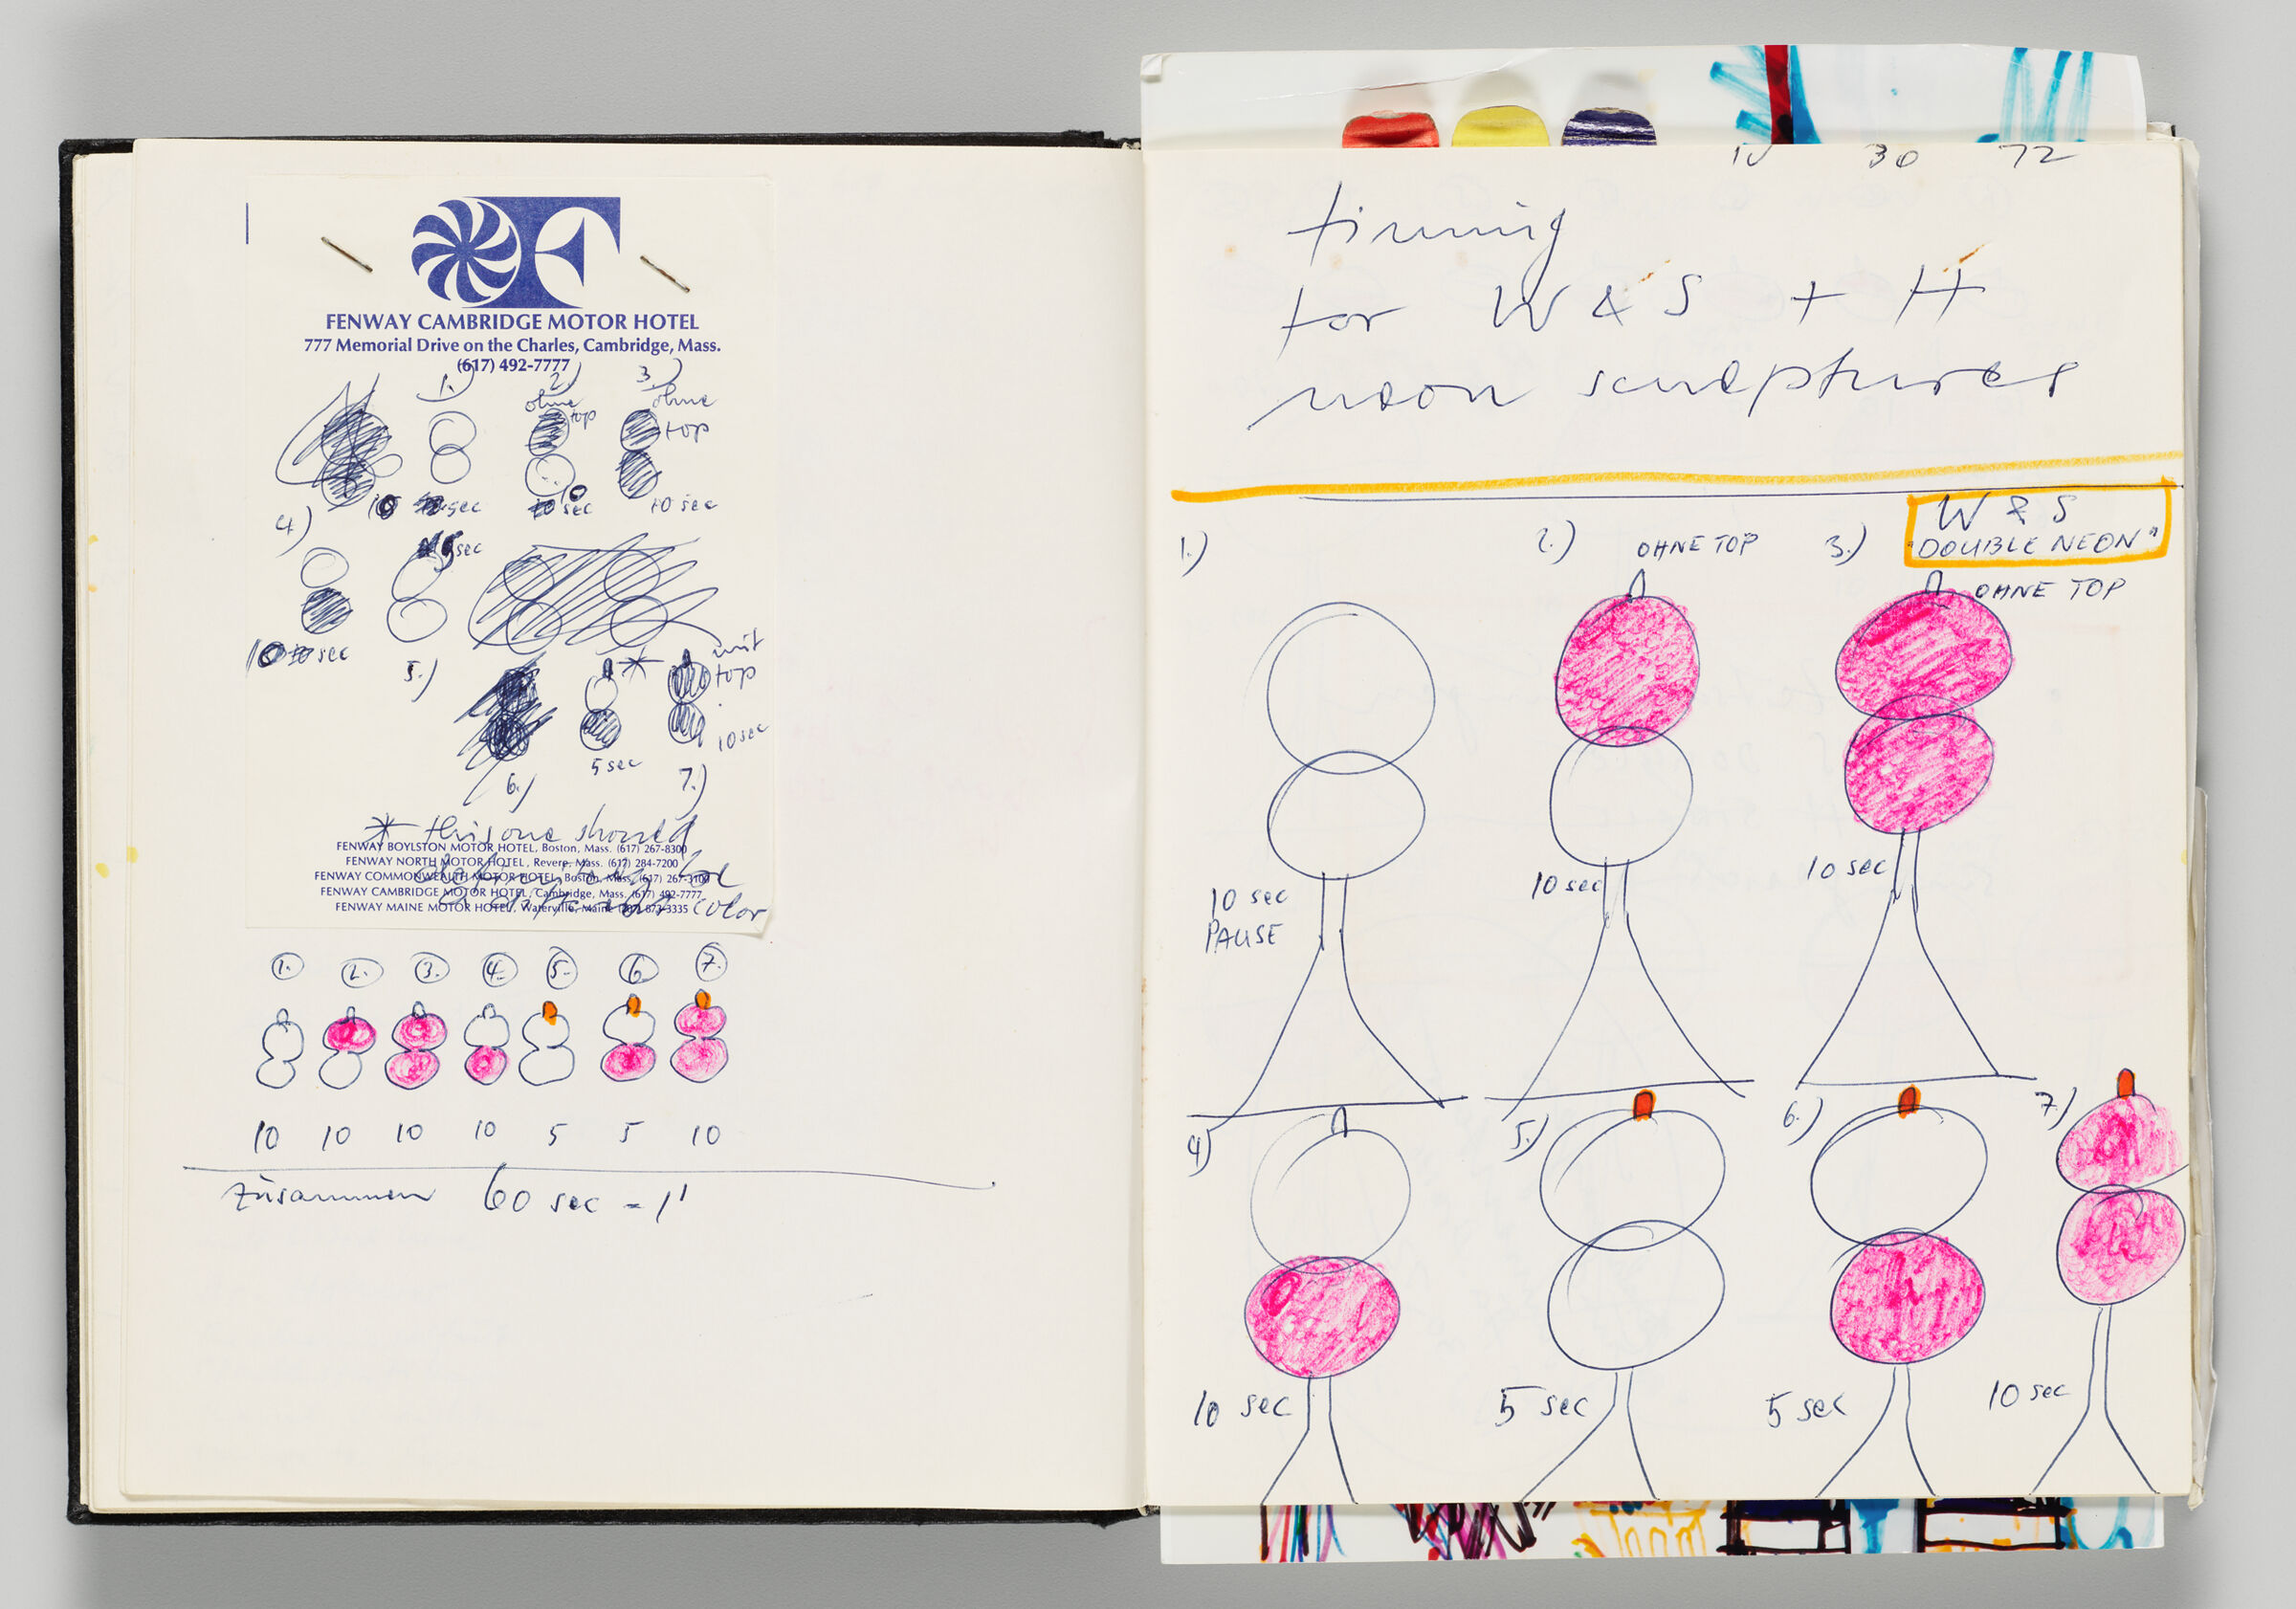 Untitled (Stapled Notes Atop Designs, Left Page); Untitled (Designs And Notes On Timing For 